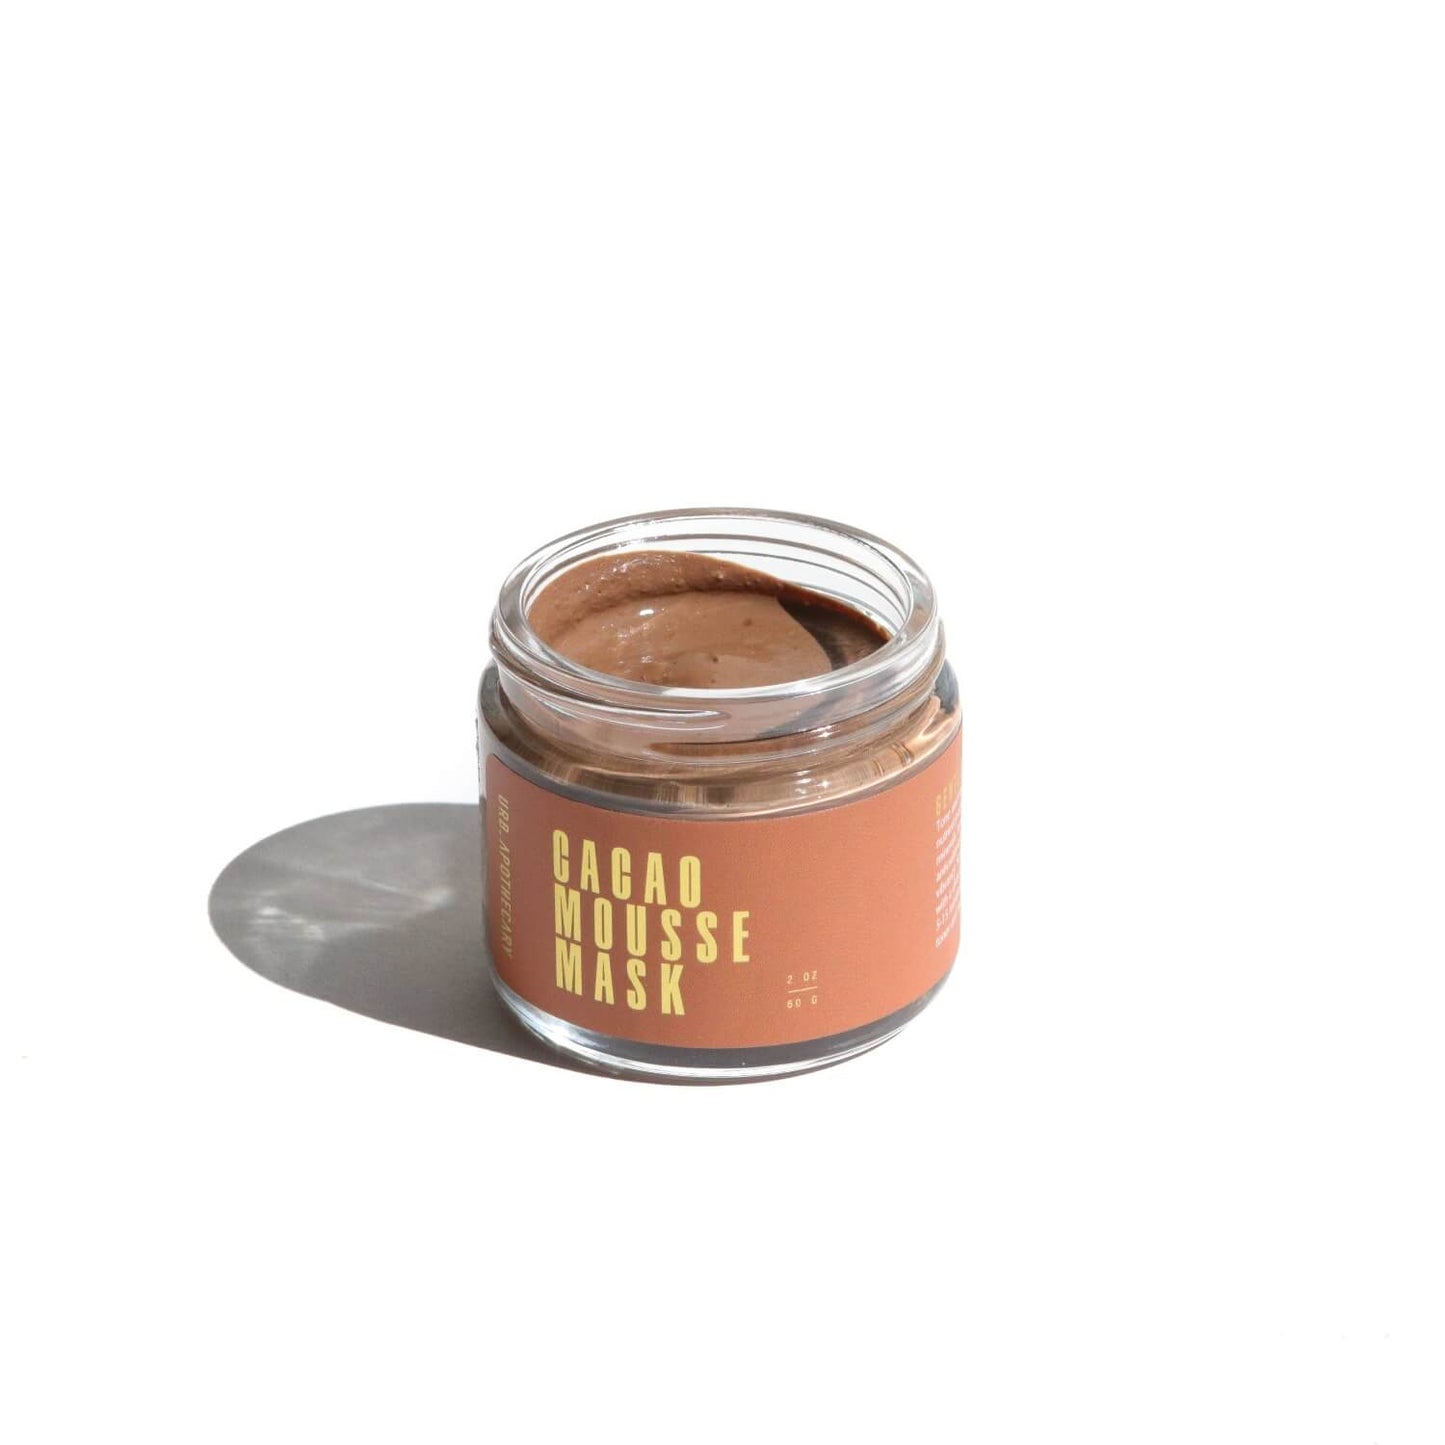 Open jar of the Cacao Mousse Mask on a white background with shadows